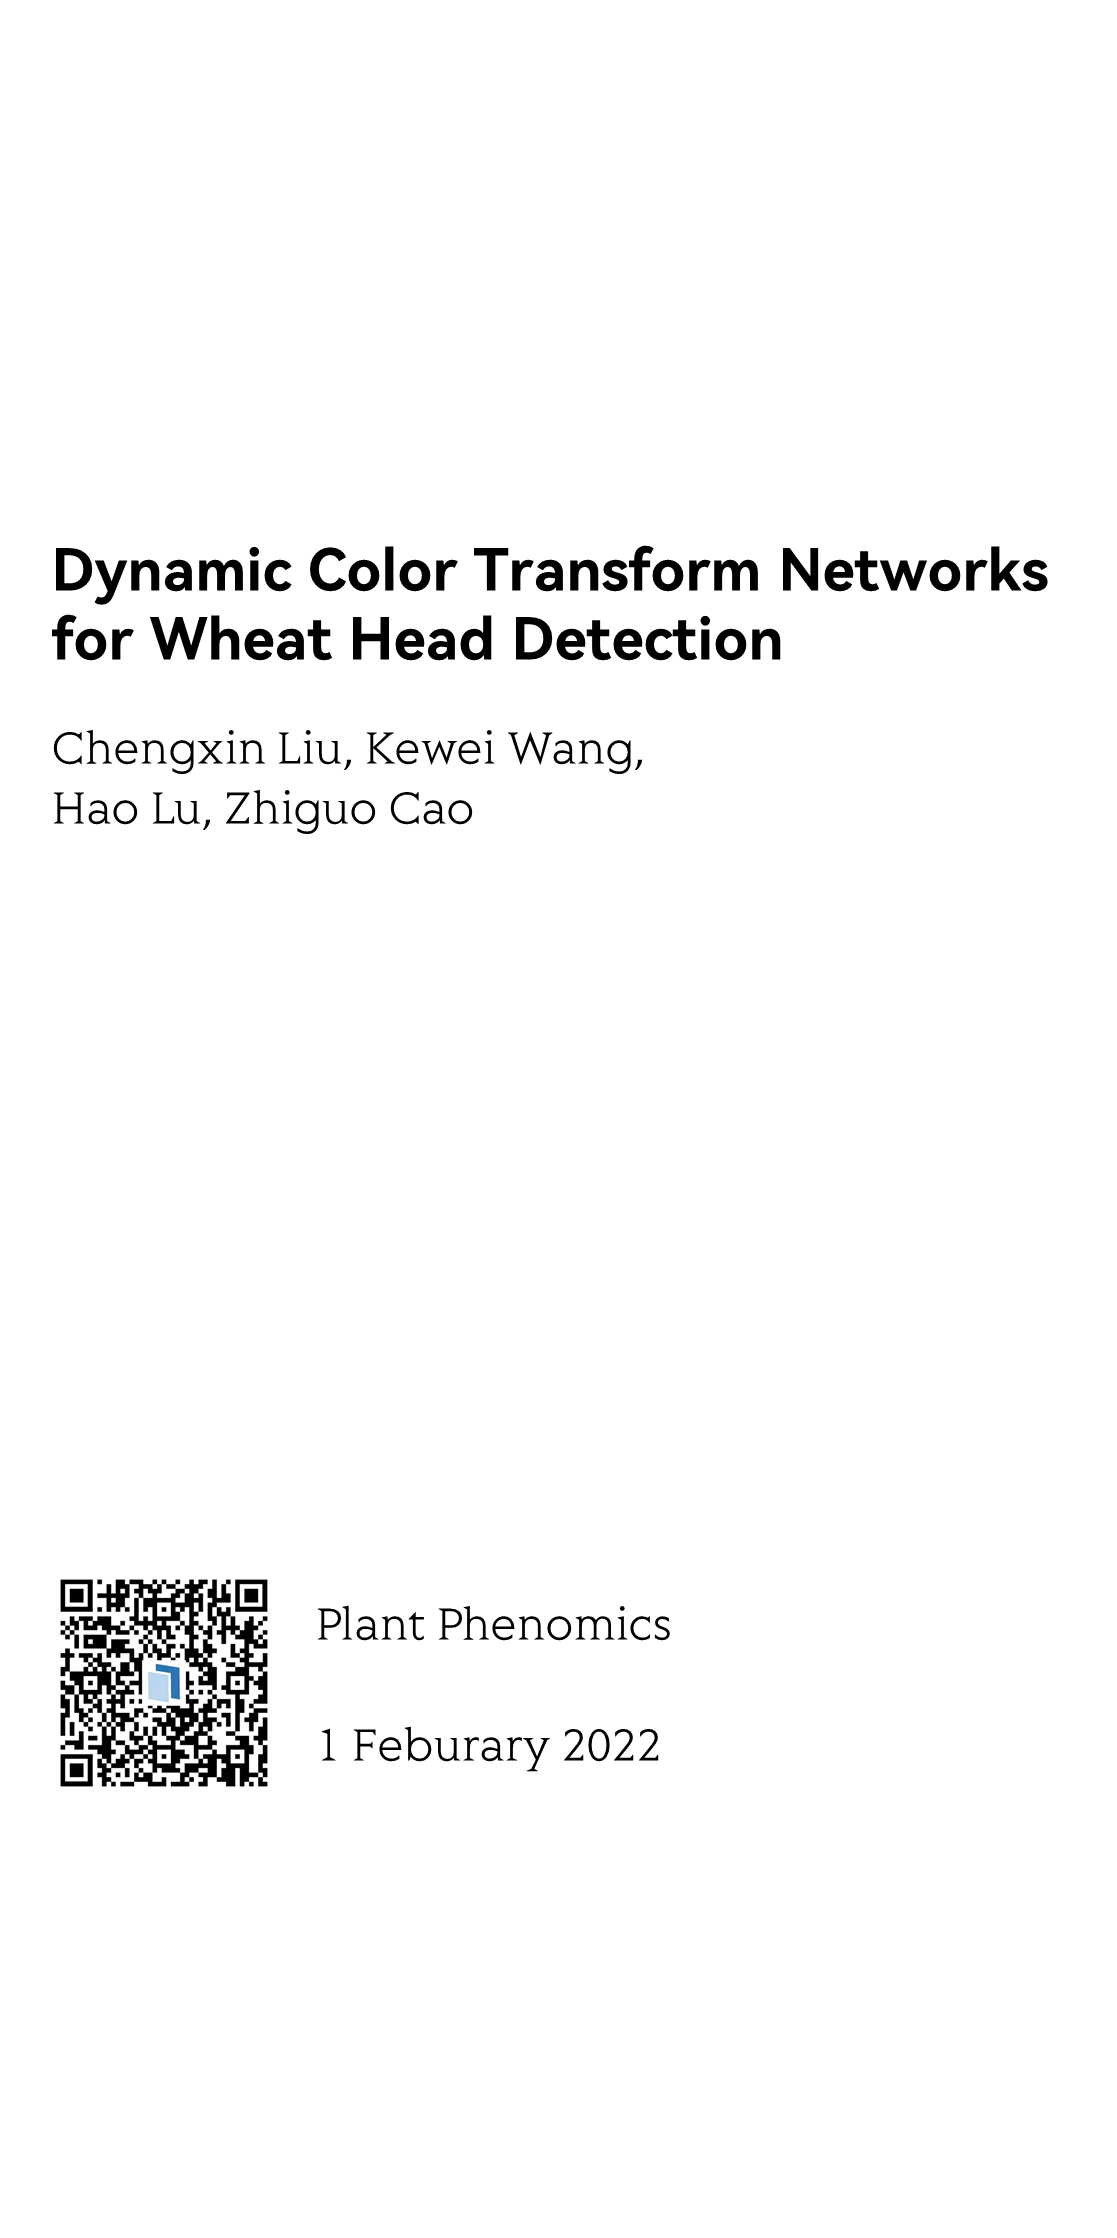 Dynamic Color Transform Networks for Wheat Head Detection_1